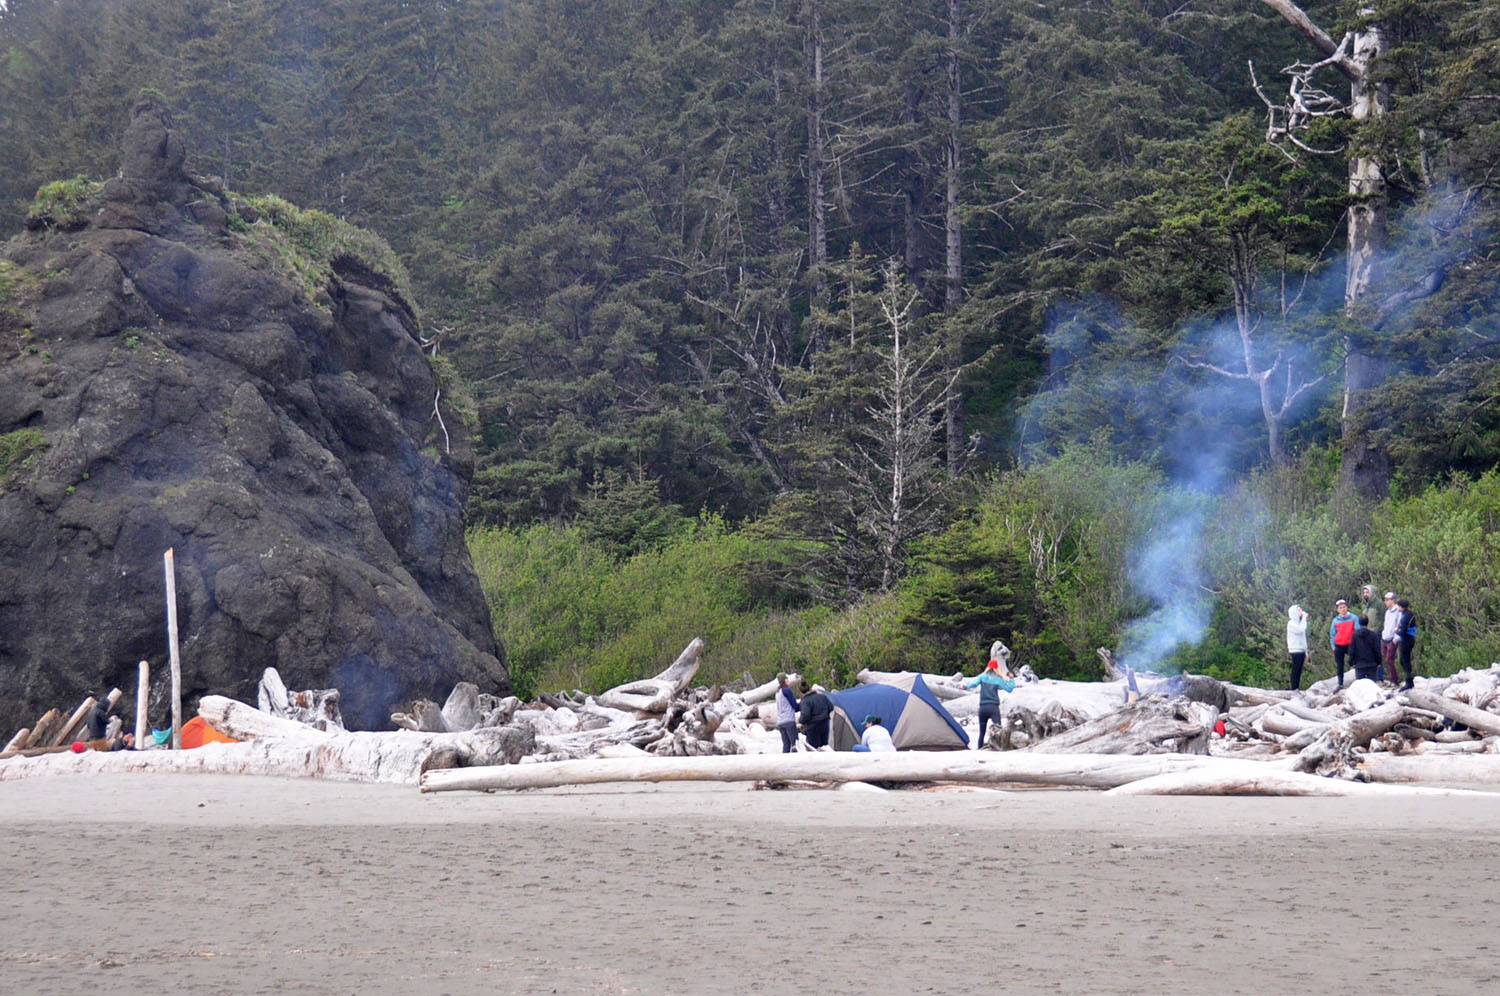 Campers congregating on Second Beach in La Push